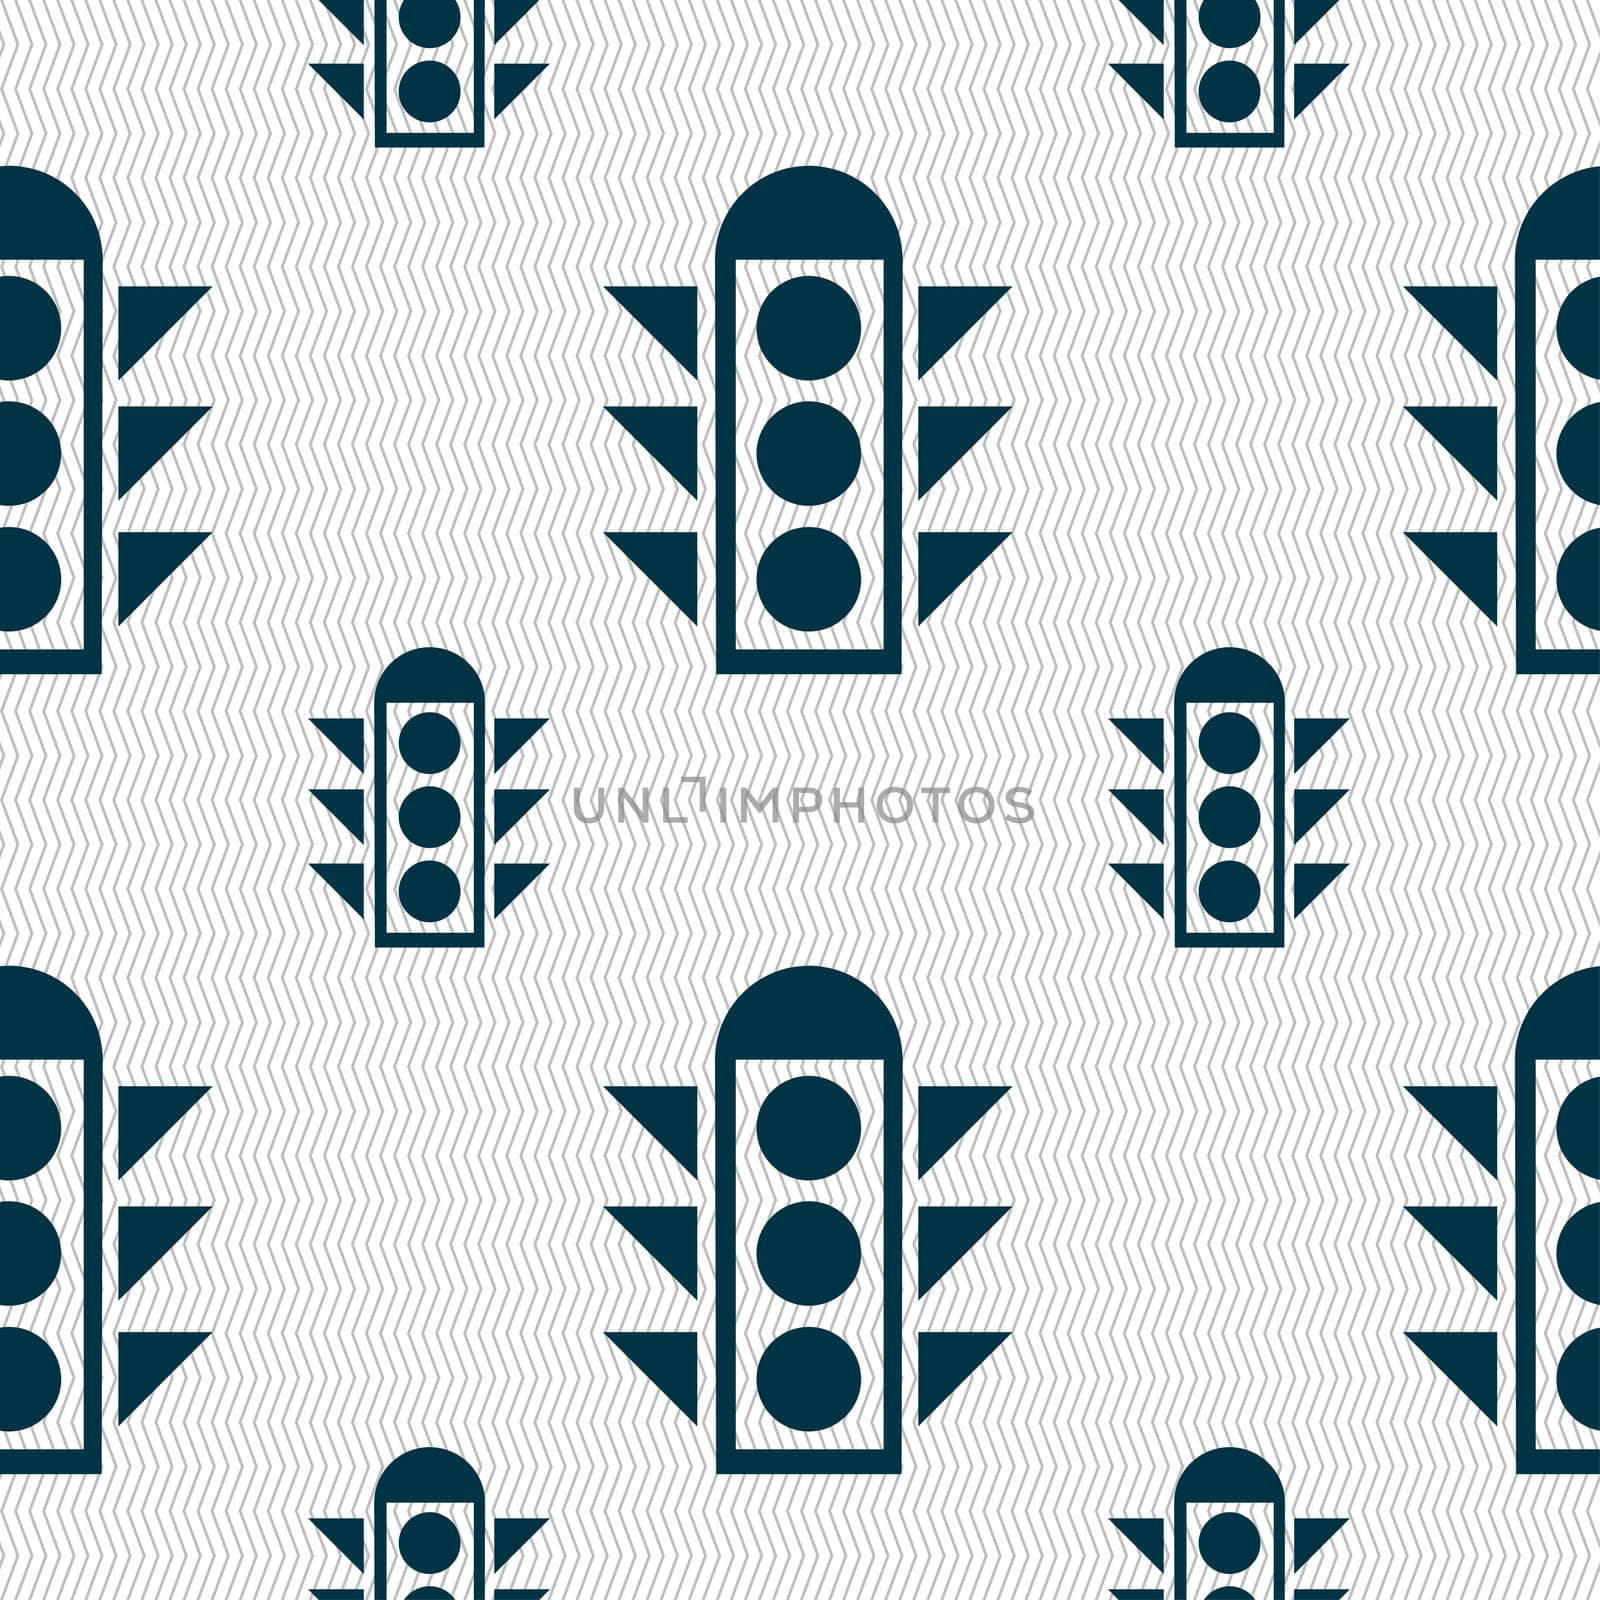 Traffic light signal icon sign. Seamless pattern with geometric texture. illustration